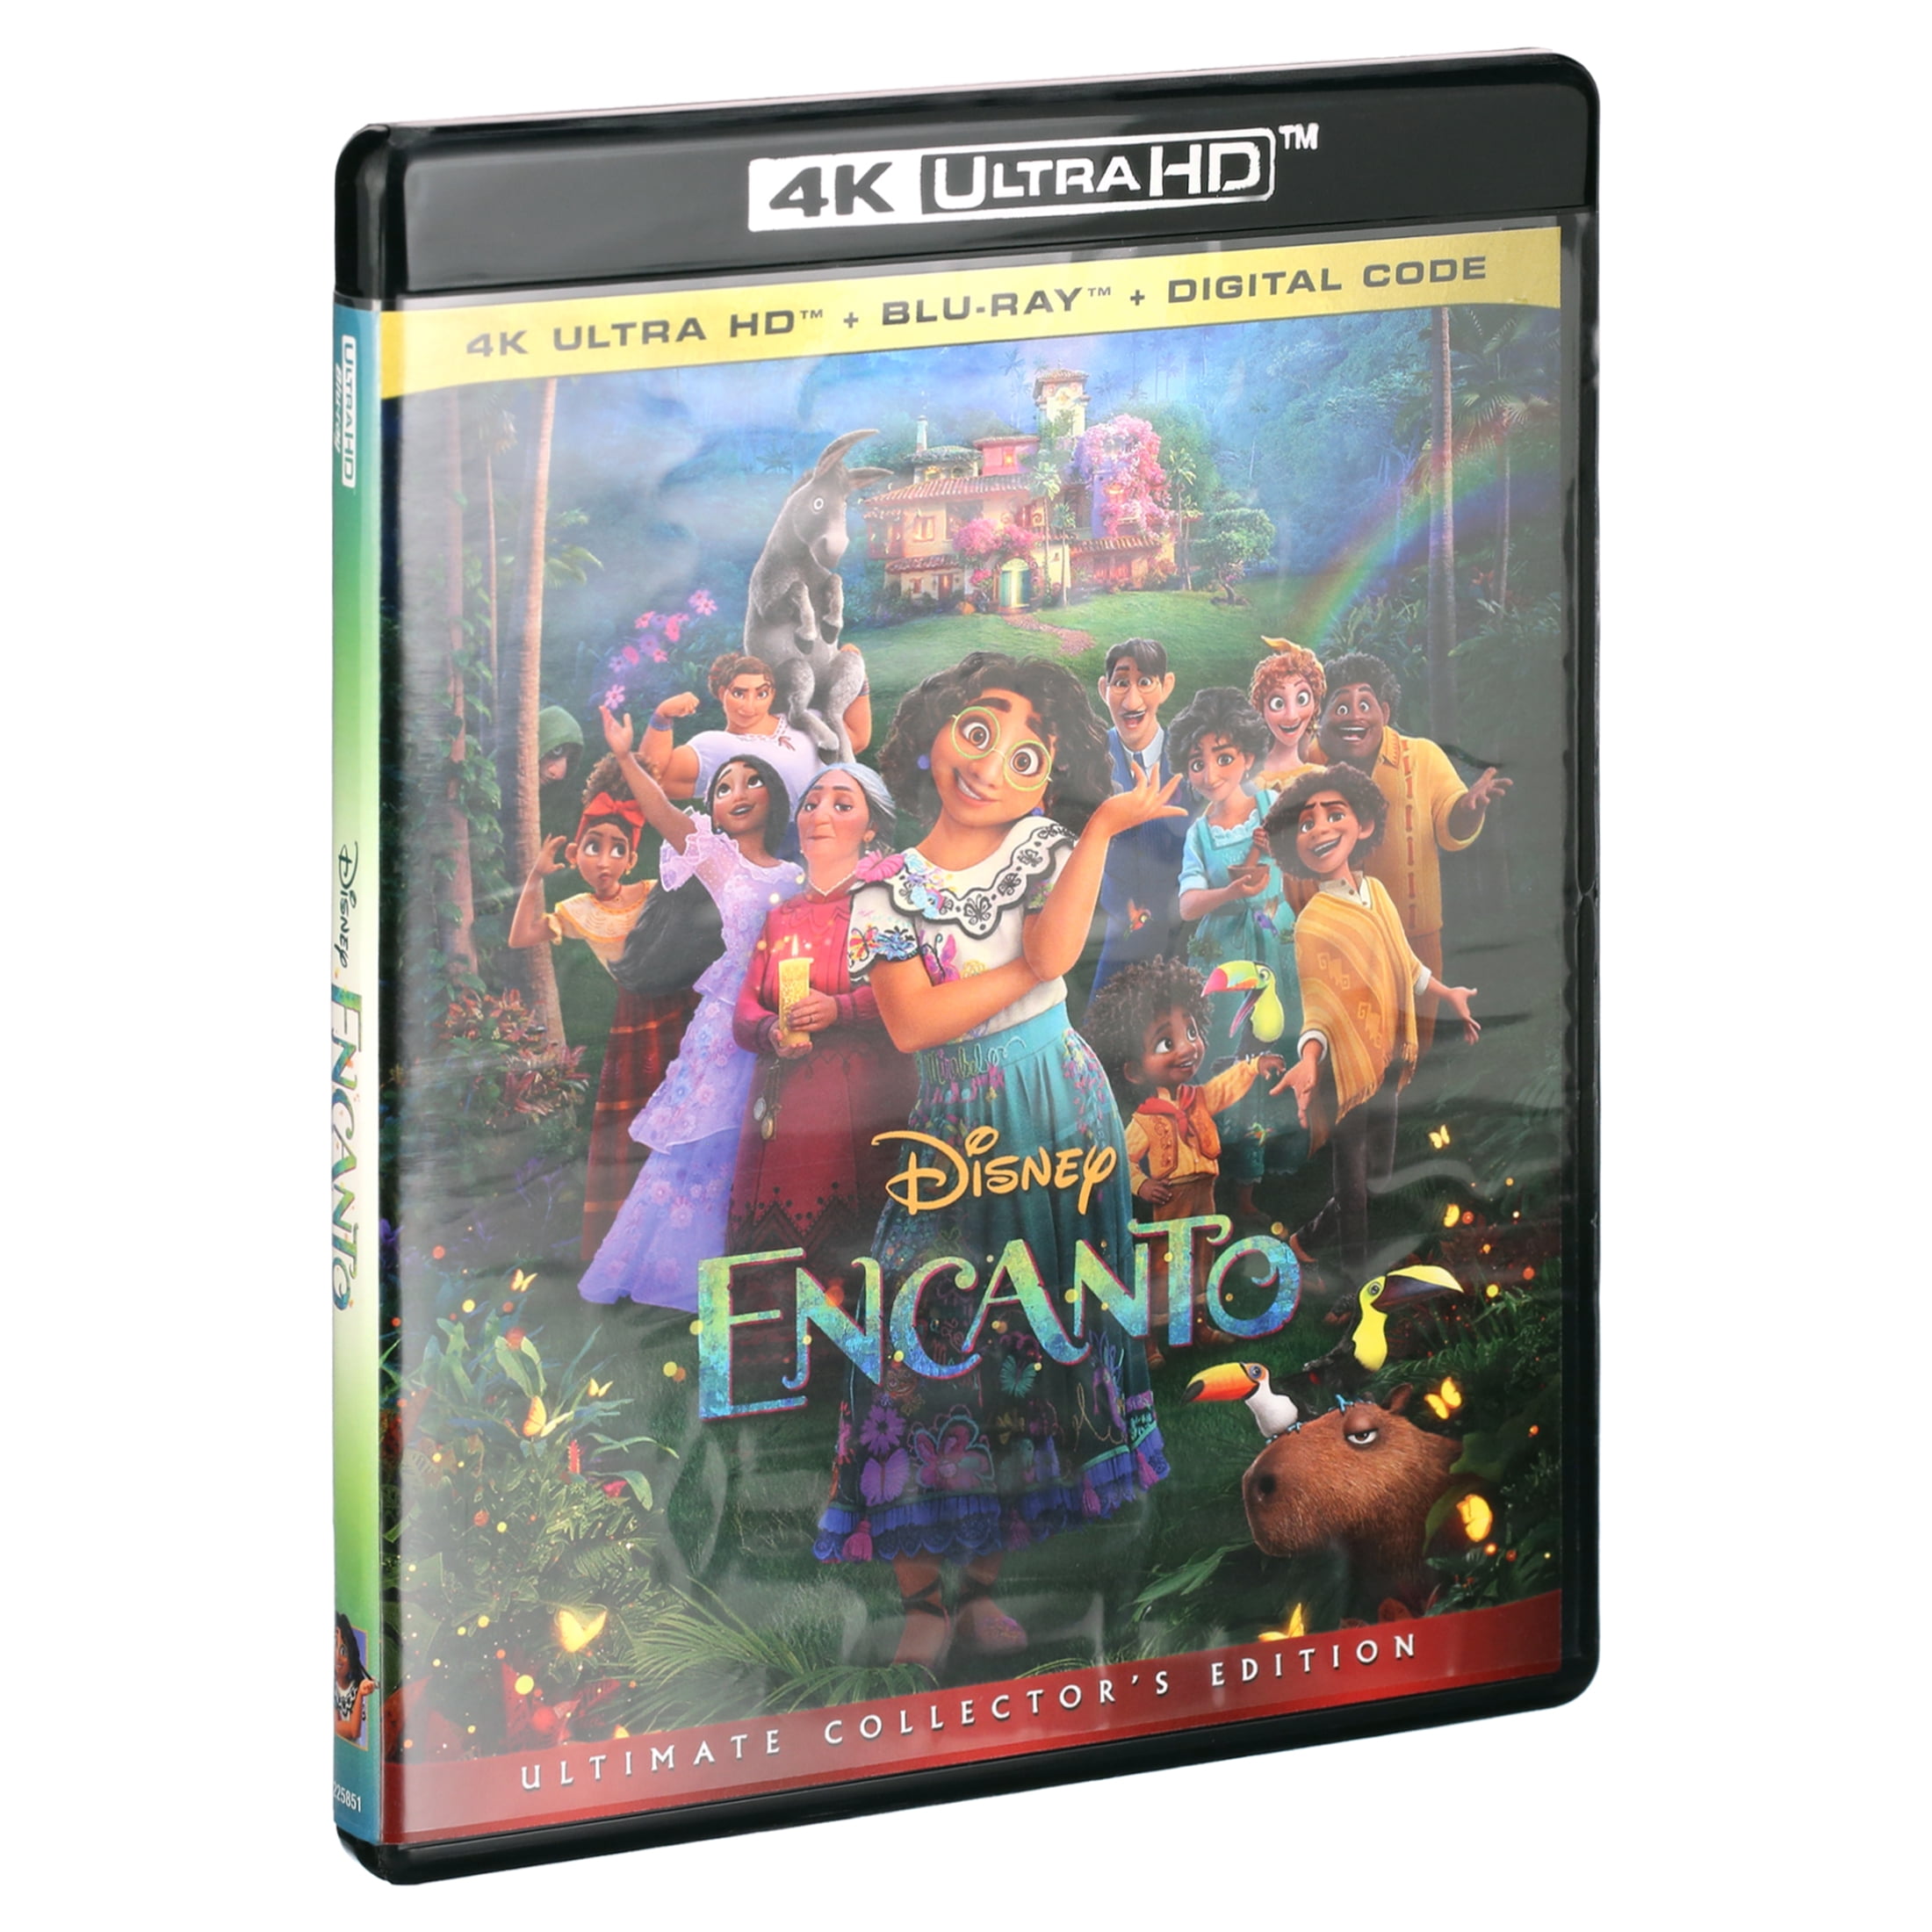 Encanto' is Coming to DVD, 4K Ultra HD, and Blu-ray in Early 2022